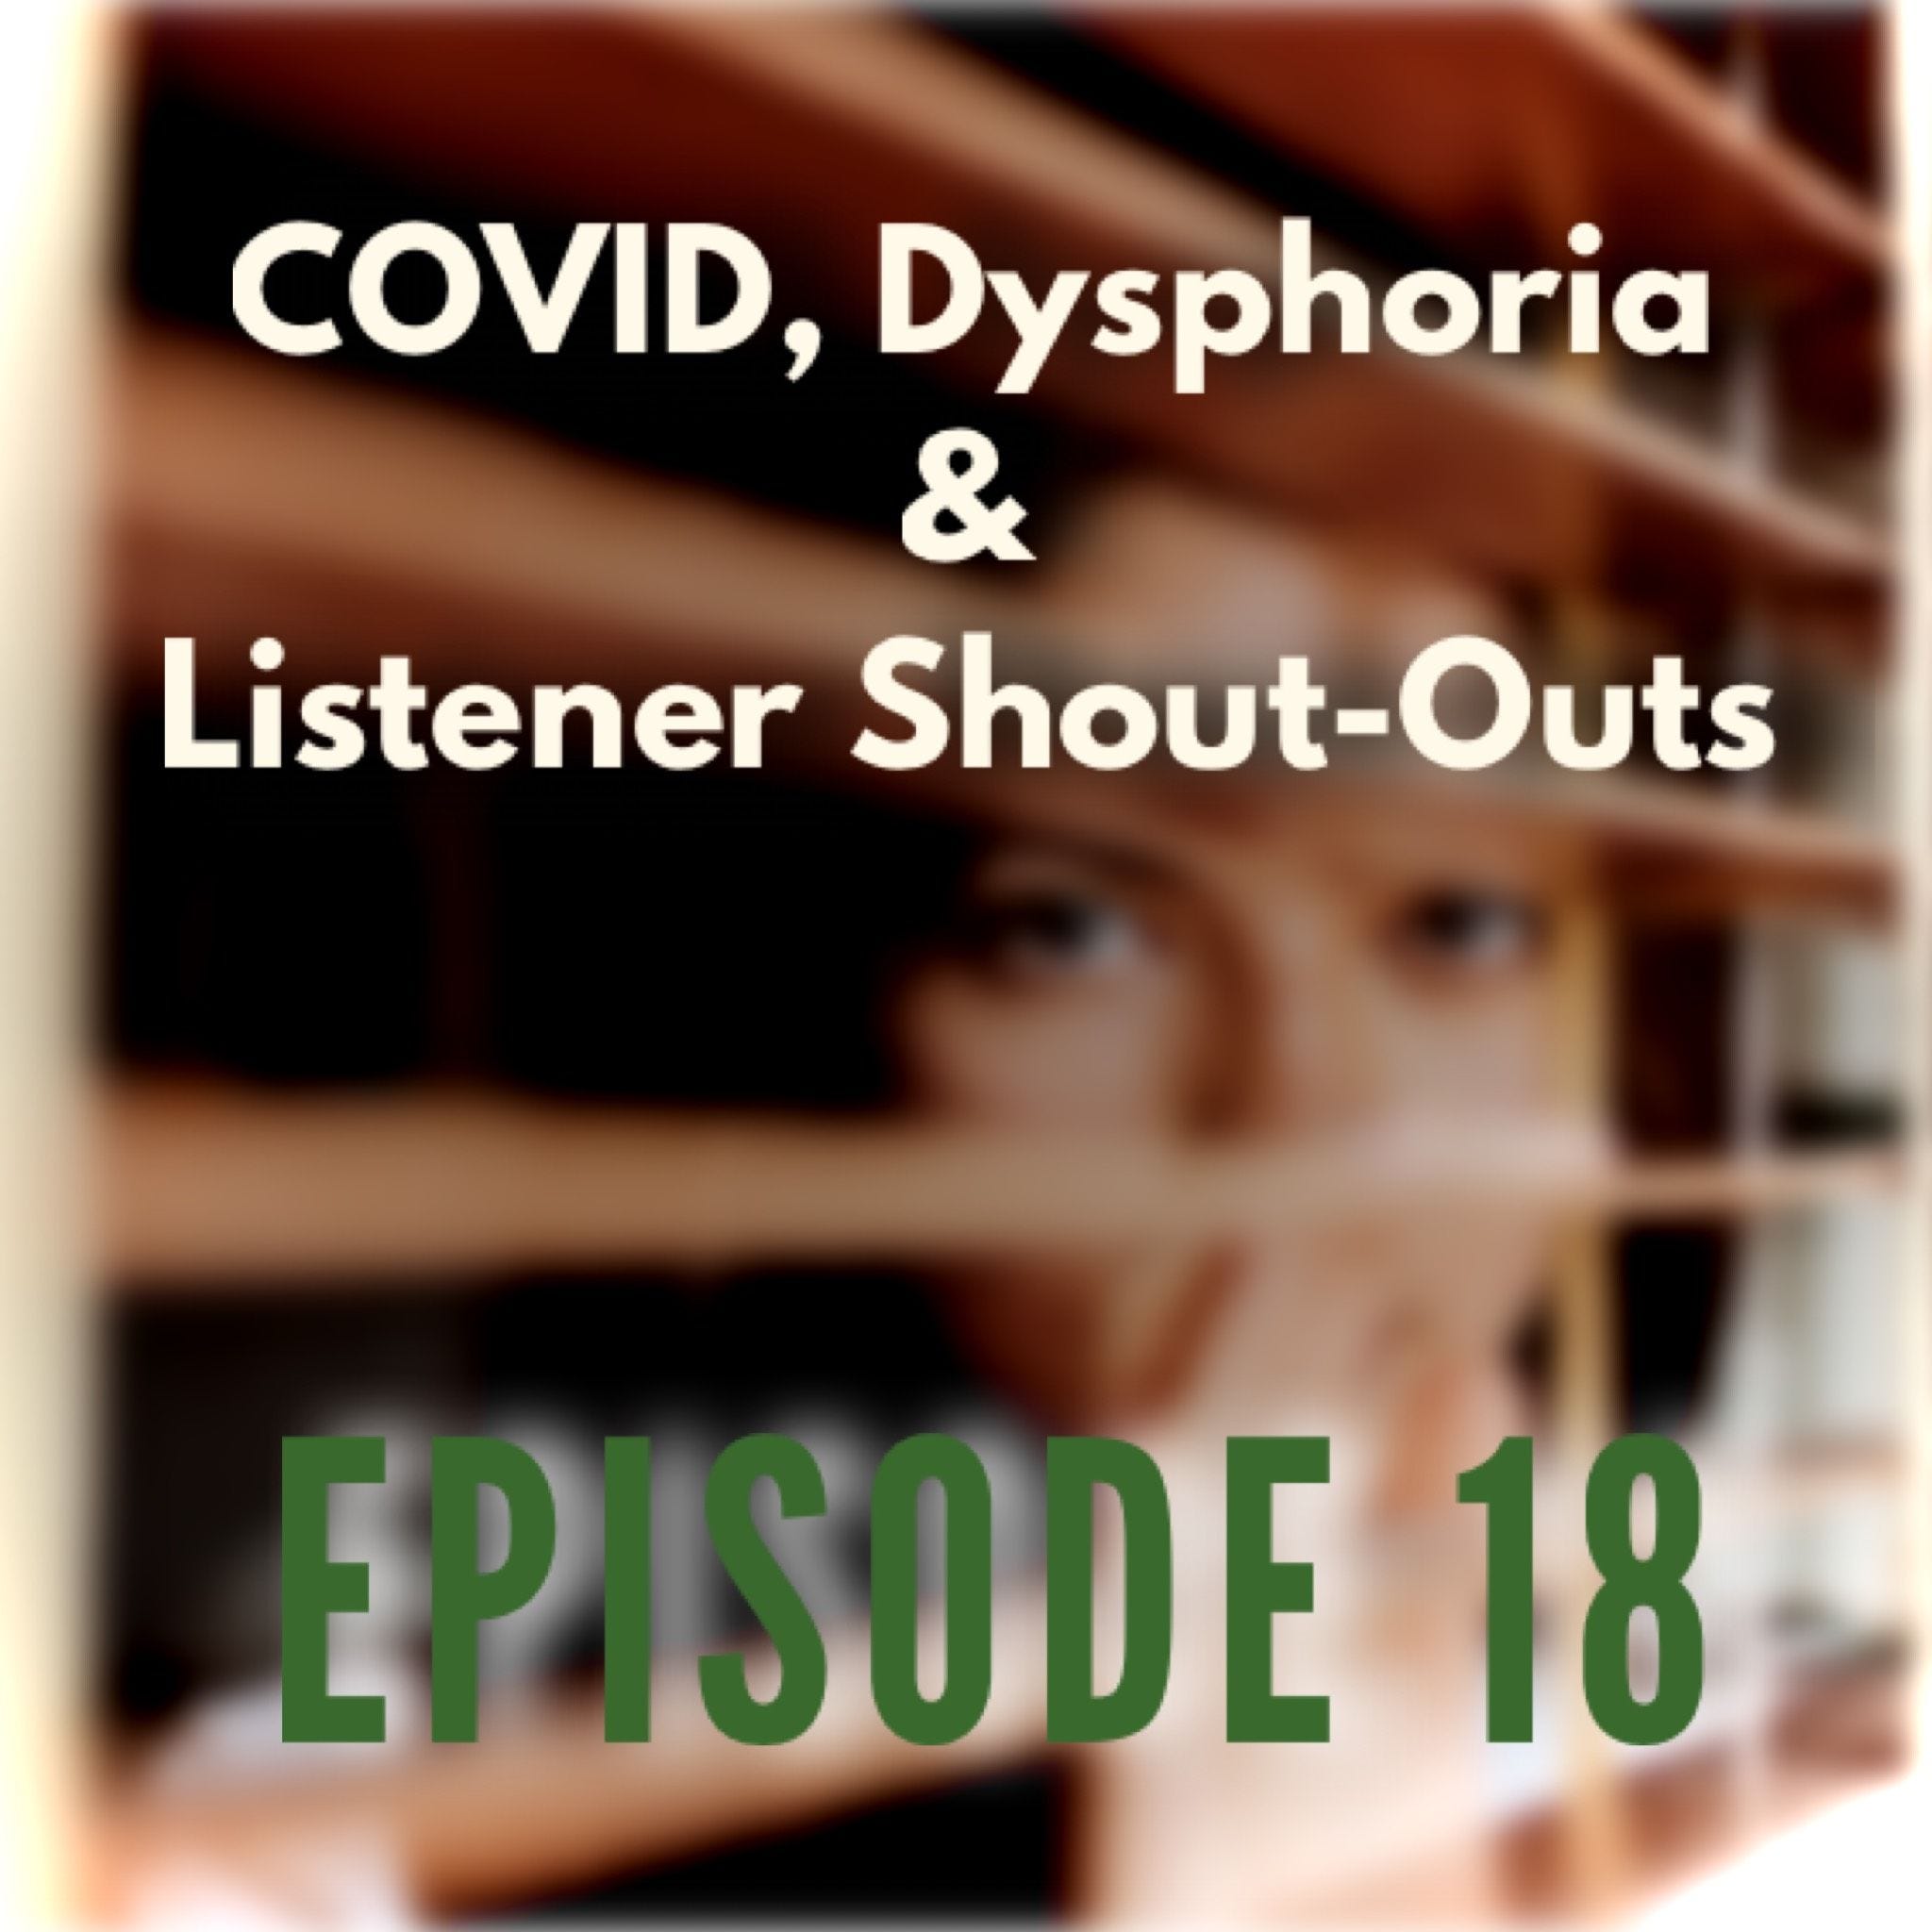 18 - COVID, Dysphoria & Listener Shout-Outs